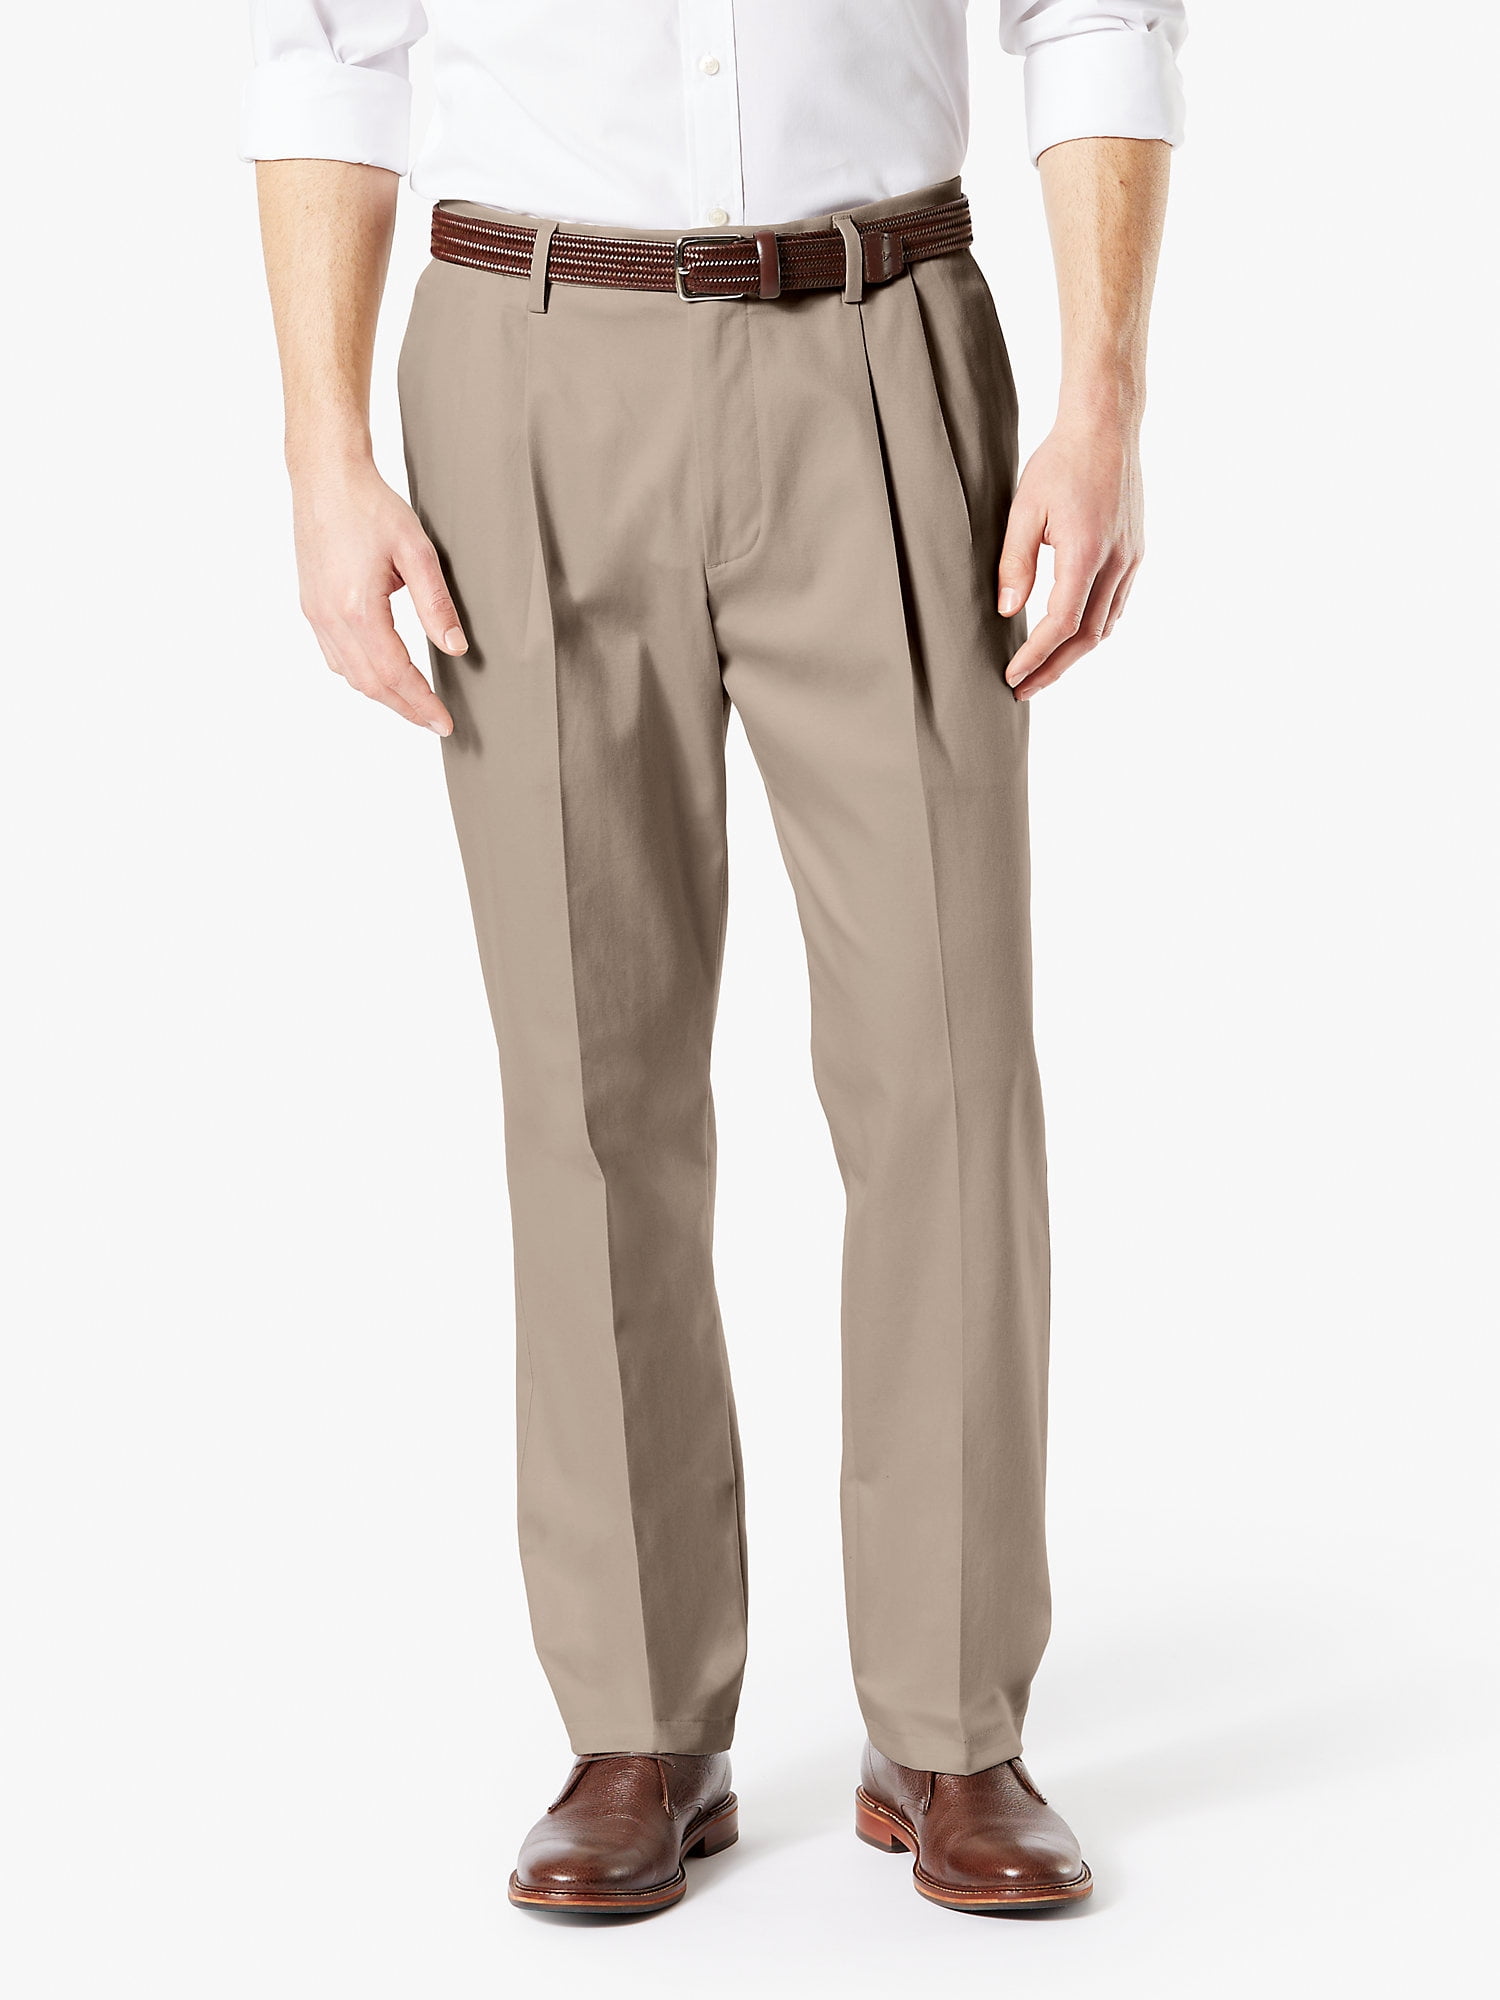 Dockers Mens Classic Fit Signature Khaki Lux Cotton Stretch Pants Regular and Big & Tall Pleated